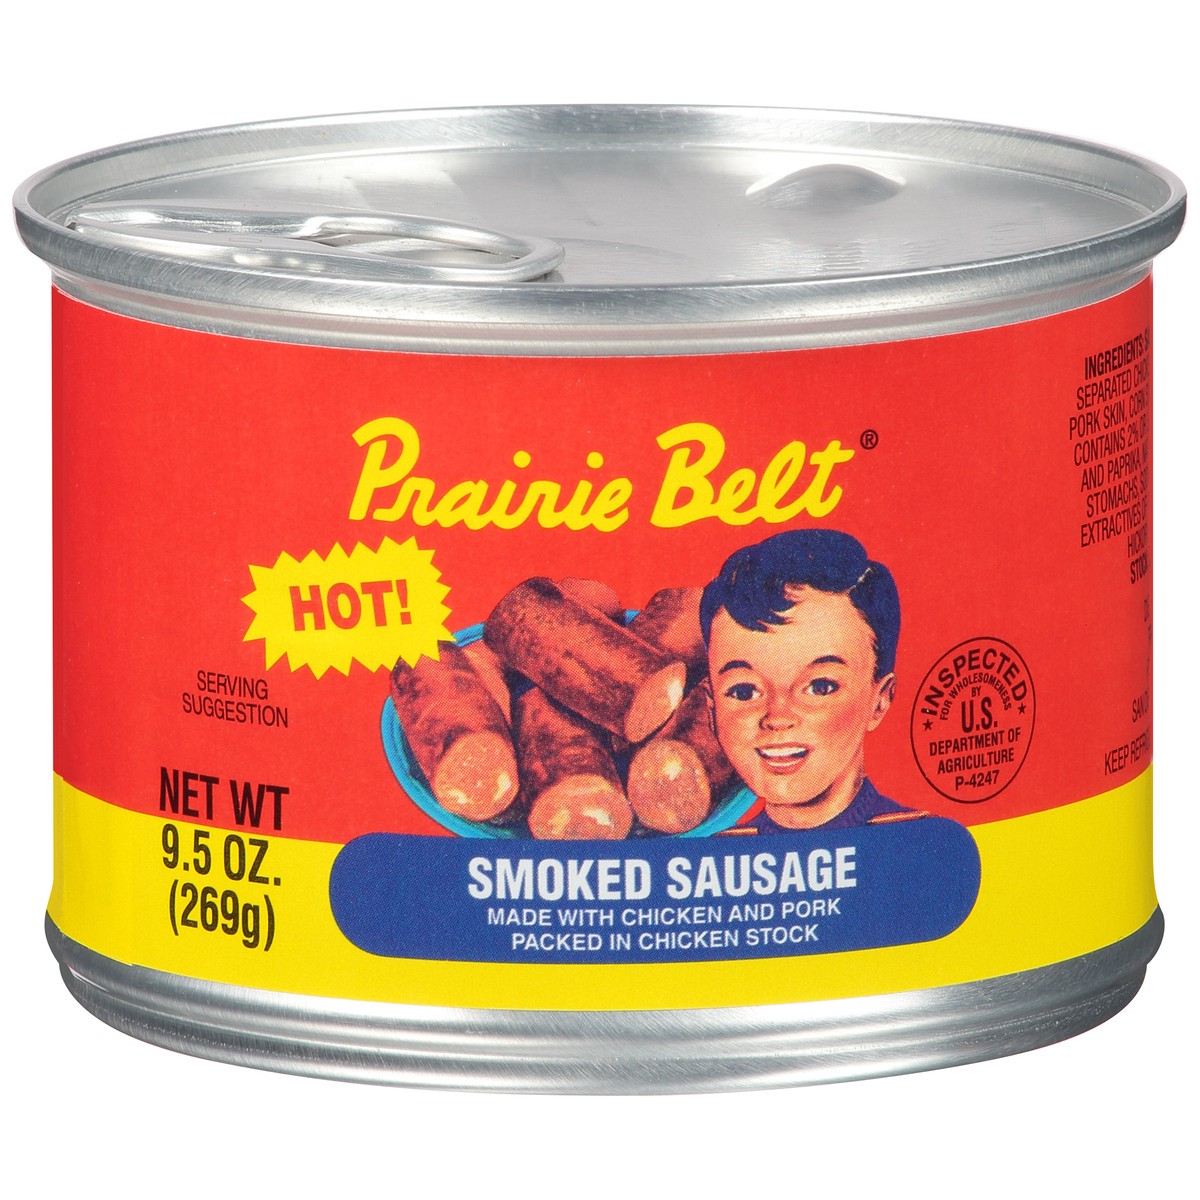 slide 1 of 14, Prairie Belt Hot Smoked Sausage 9.5 oz. Pull-Top Can, 9.5 oz